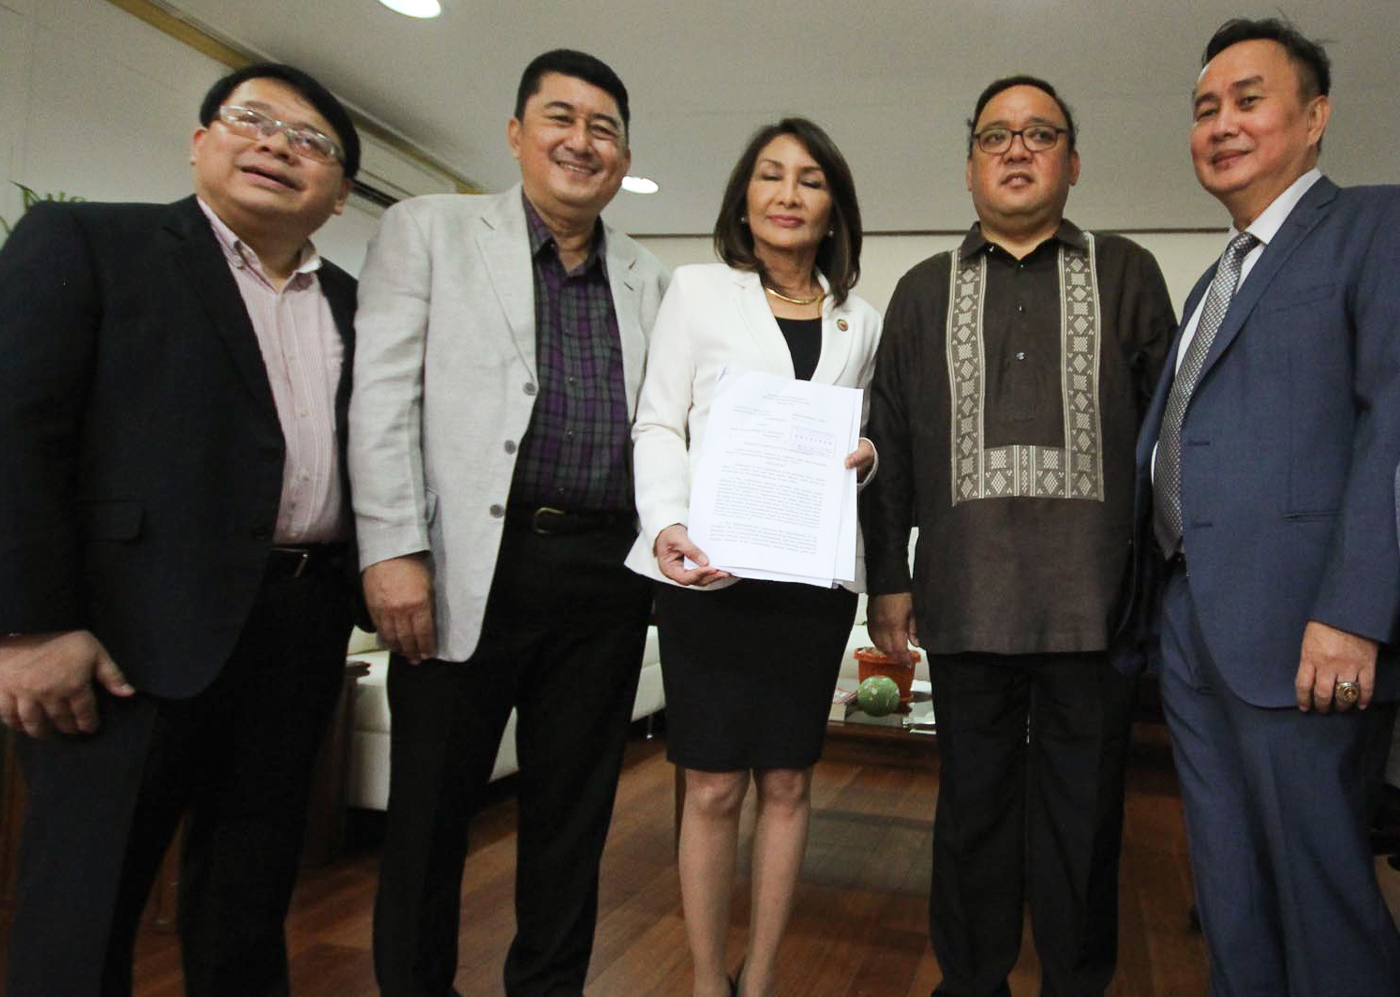 BAUTISTA COMPLAINT. Impeachment endorsers (from right to center) Rep. Abraham Tolentino, Rep. Harry Roque, Rep. Gwendolyn Garcia show a copy of affidavit of verified complaint for impeachment filed by Atty. Ferdinand Topacio (extreme left) and former Rep. Jing Paras (2nd-left) vs Comelec chairman Andy Bautista at the House of Representatives on Aug 23, 2017. Photo by Darren Langit/Rappler  